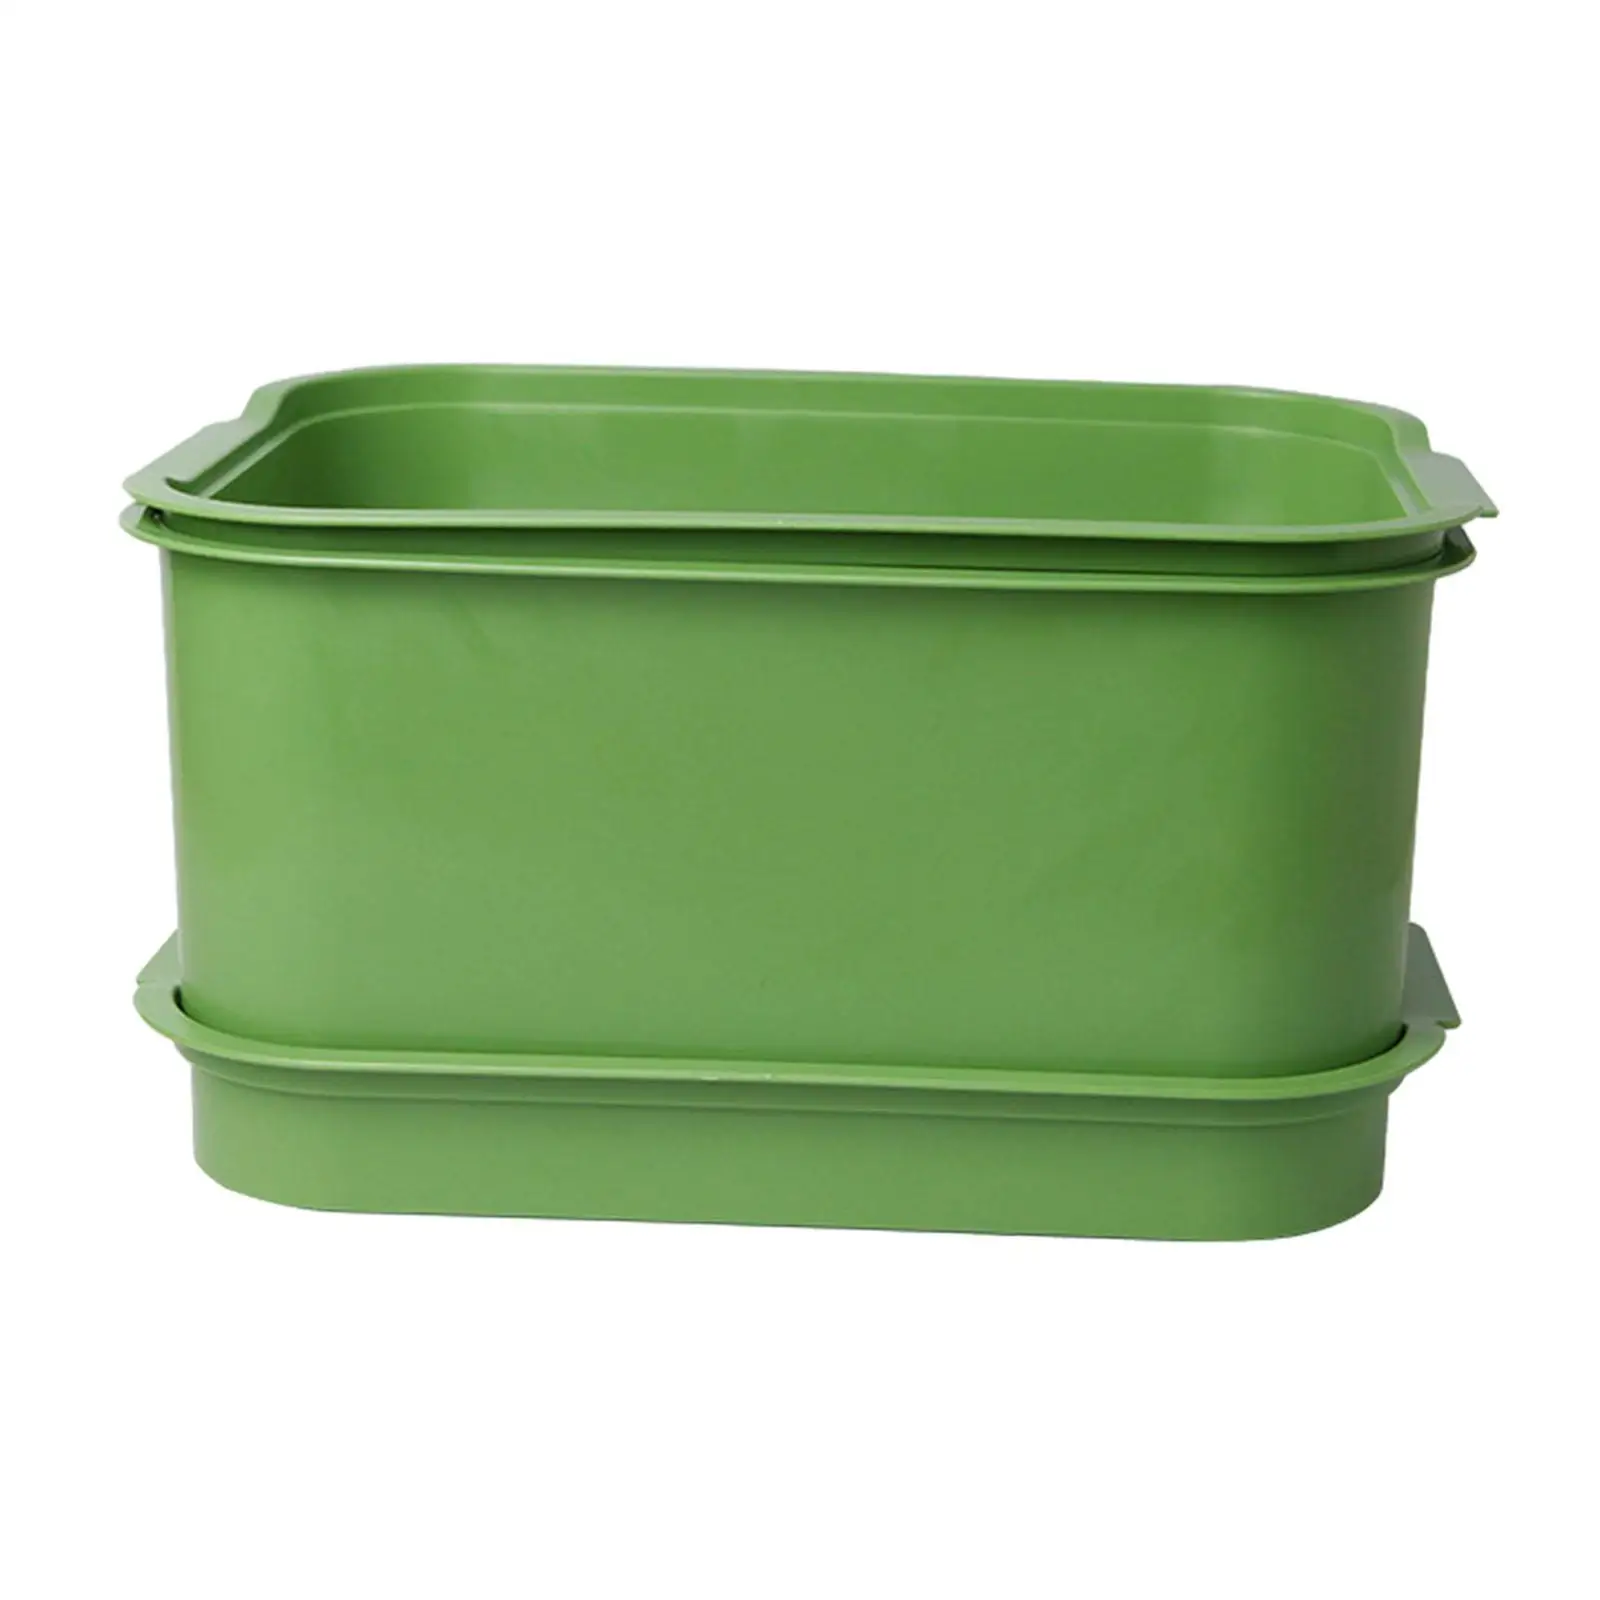 Bean Sprouts Sprouting Tray Set Three Layers Saving Space Smooth Surface Multipurpose Green Sturdy Large Capacity Storage Box